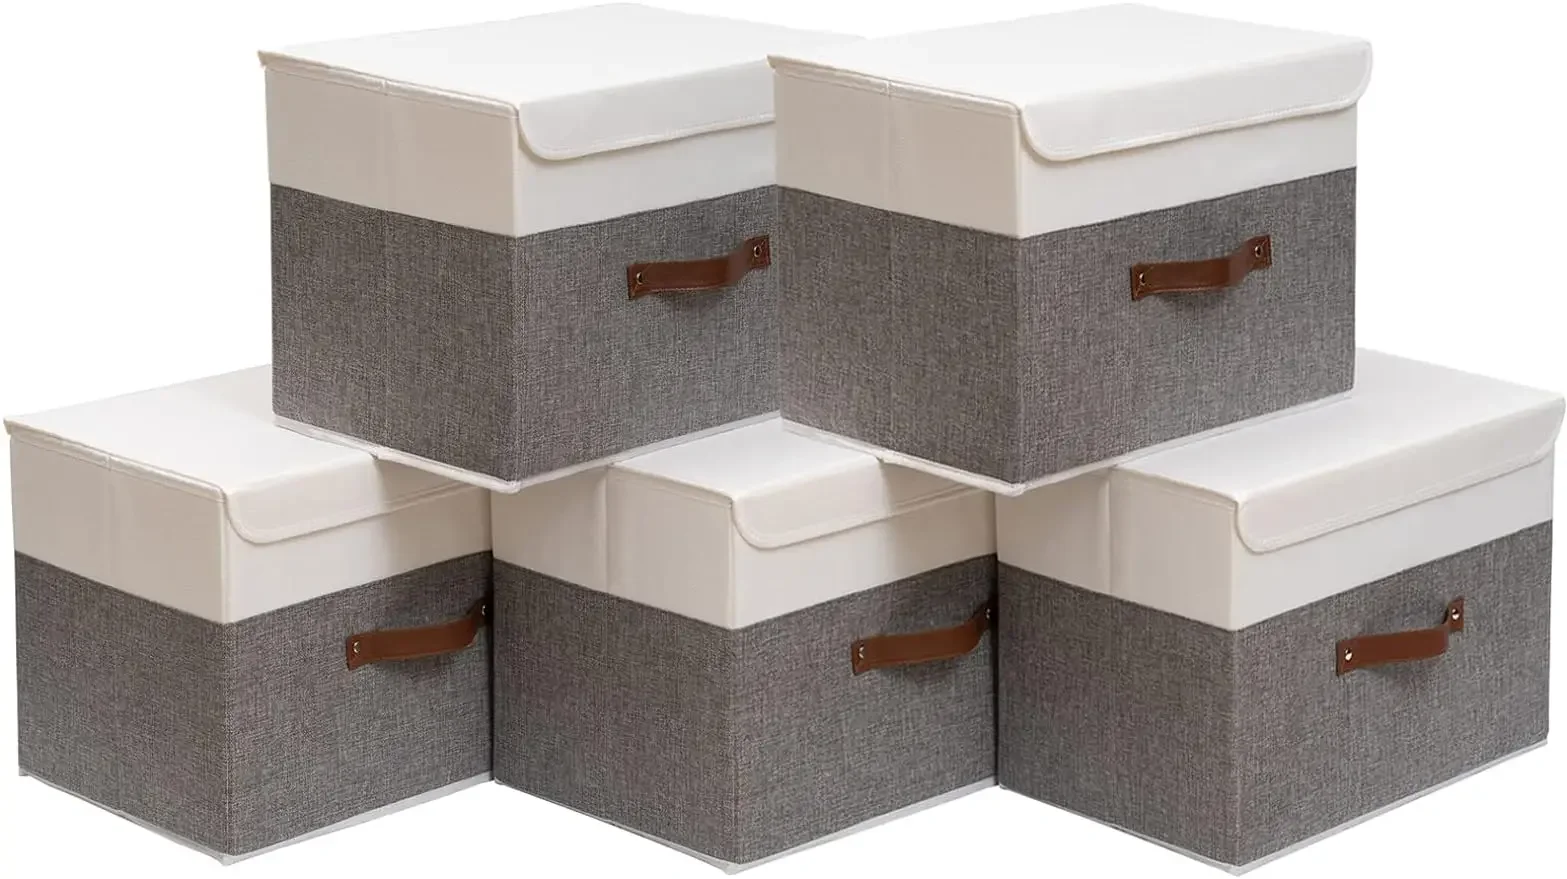 

Foldable storage box with lid, large linen foldable storage box organizer, closet organizer 17.7 x 11.8 x 11.8 inches, 5 packs